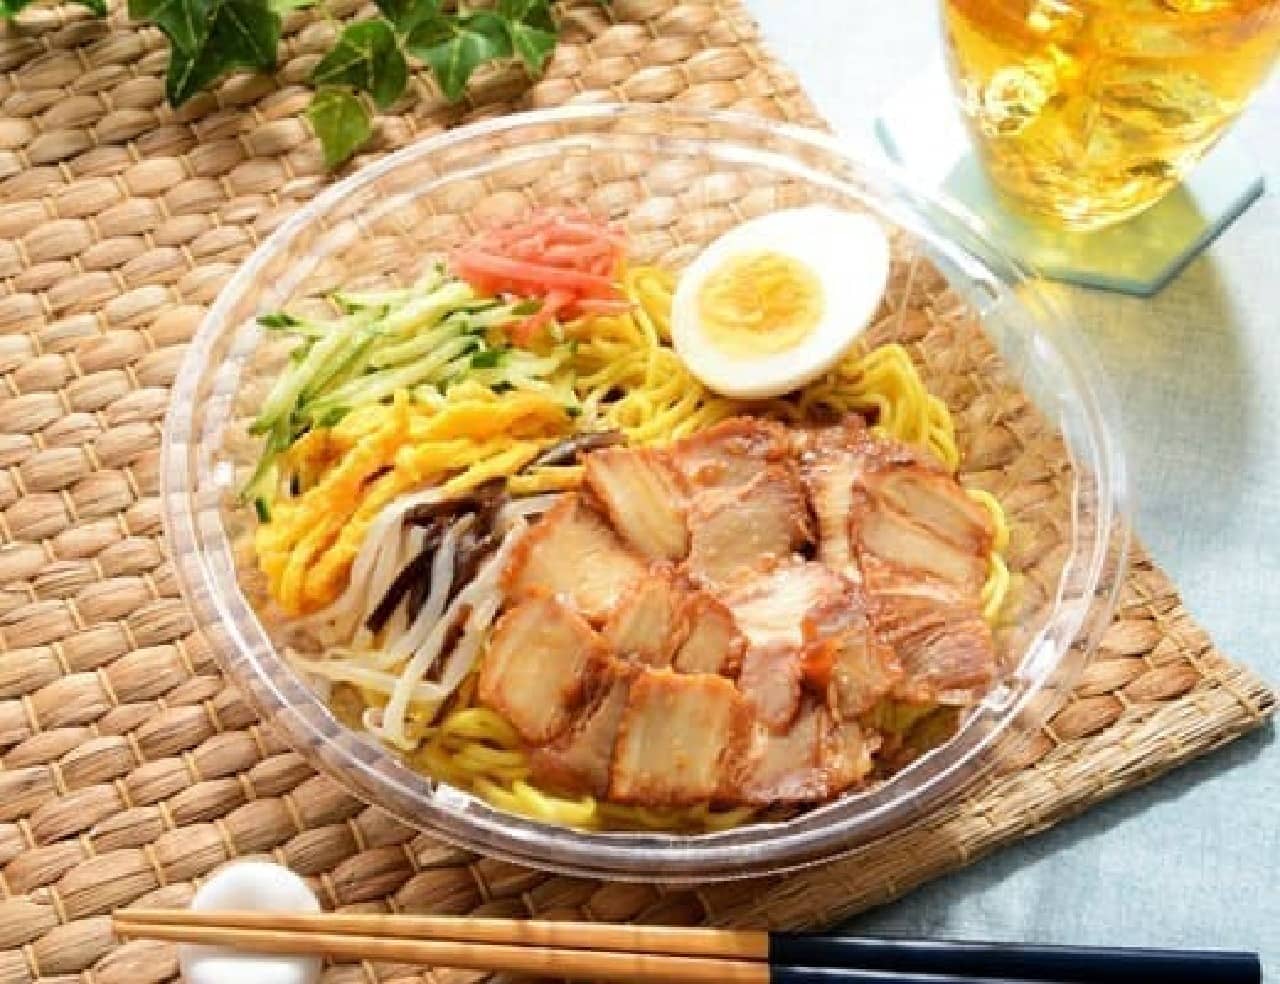 Lawson "Cold Chinese food with soy sauce (direct fire grilled char siu)"